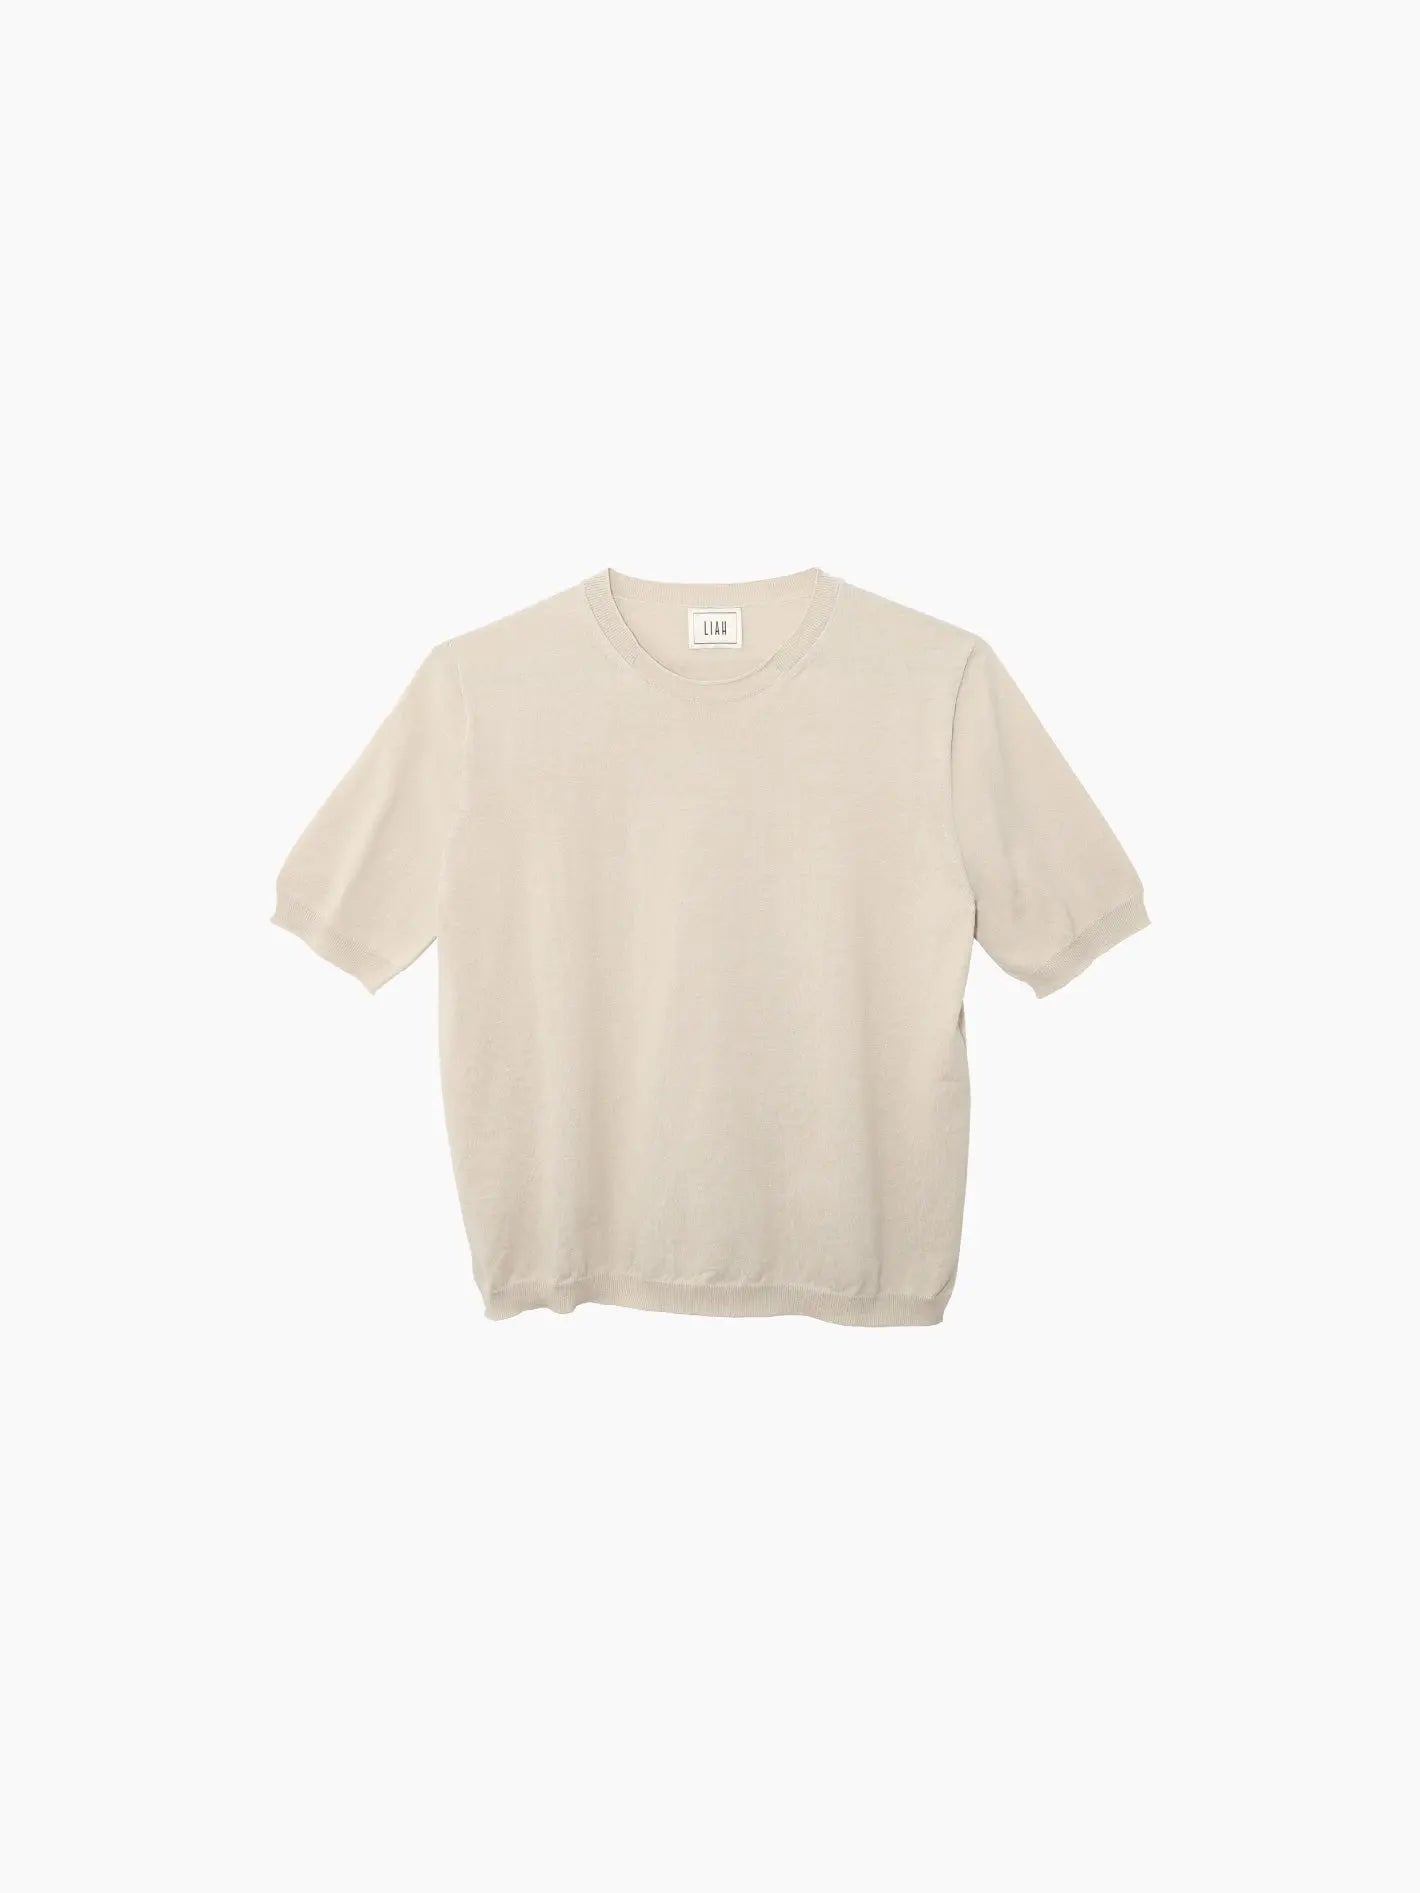 A beige short-sleeve sweater made from a soft, lightweight material. It has a simple, minimalist design with a round neckline and a loose fit, displayed against a plain white background. The Gia T-Shirt Tea by Liah is available exclusively at Bassalstore in Barcelona.